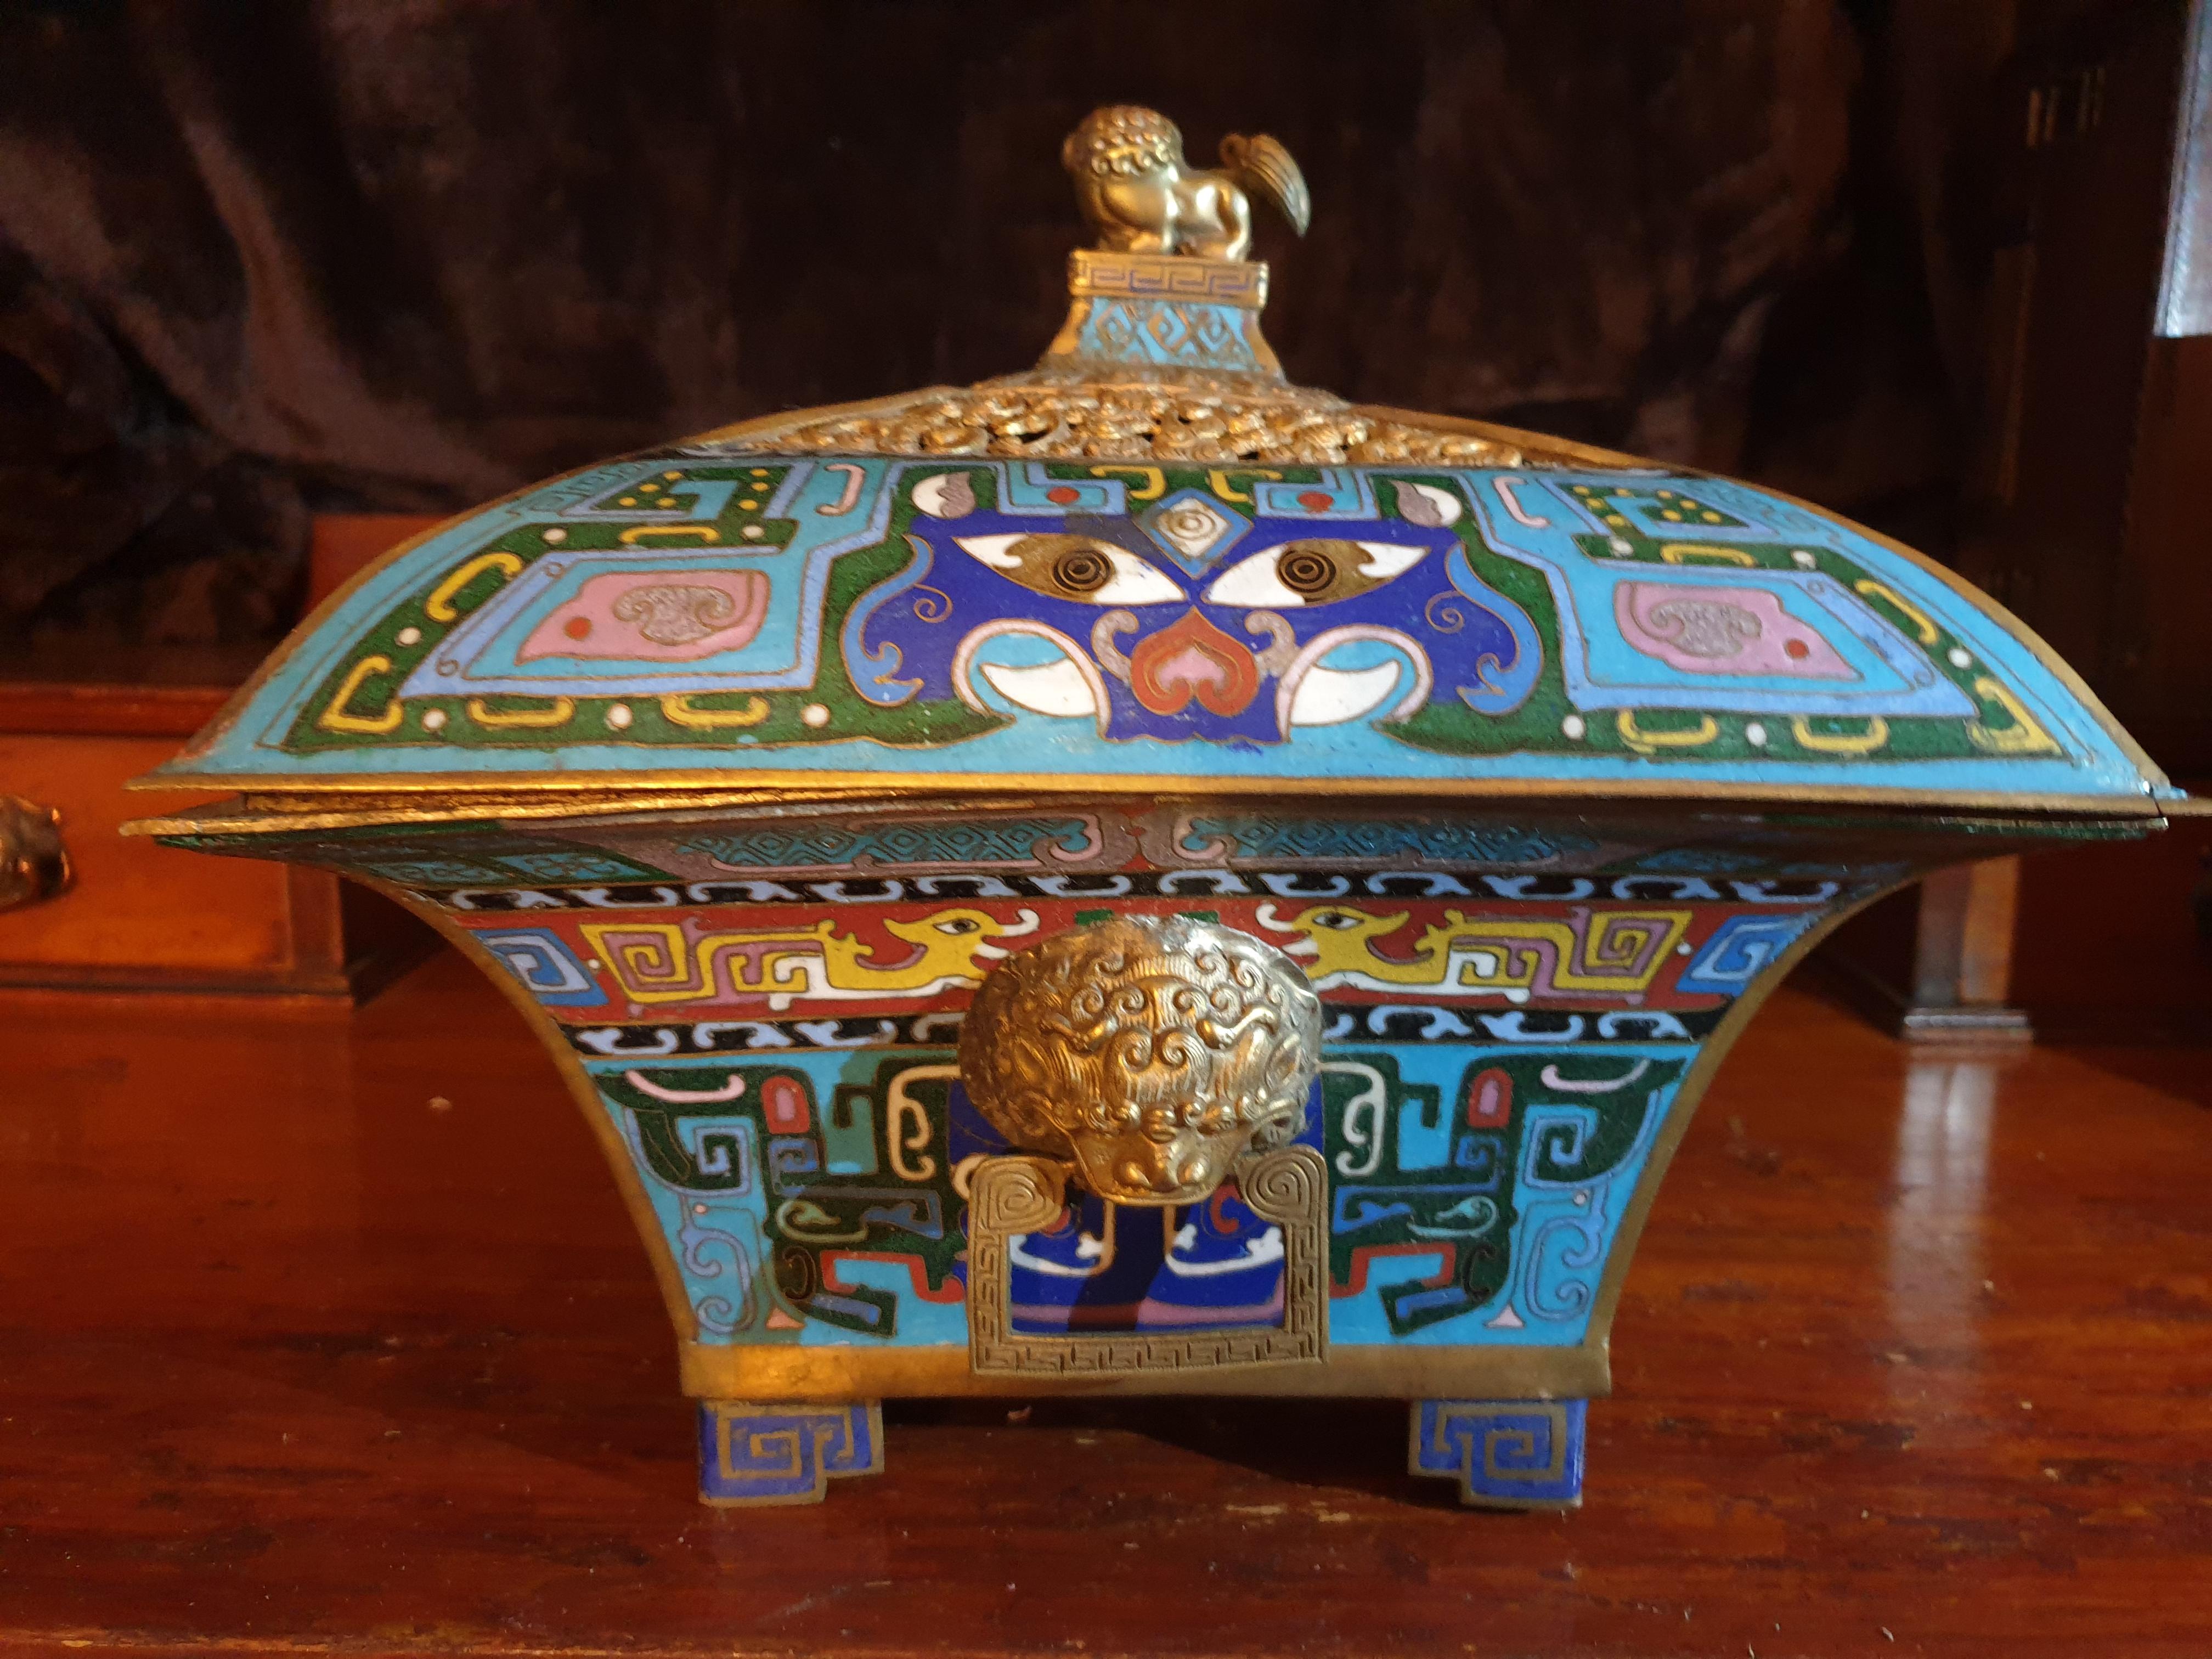 An important Chinese square shaped Cloisonné Qing Dynasty incense burner, depicated with lion handles and gold gilt lion as on the lid. Reticulated gilt border scroll work with heavy attention to detail on the Cloisonné work with other mythical